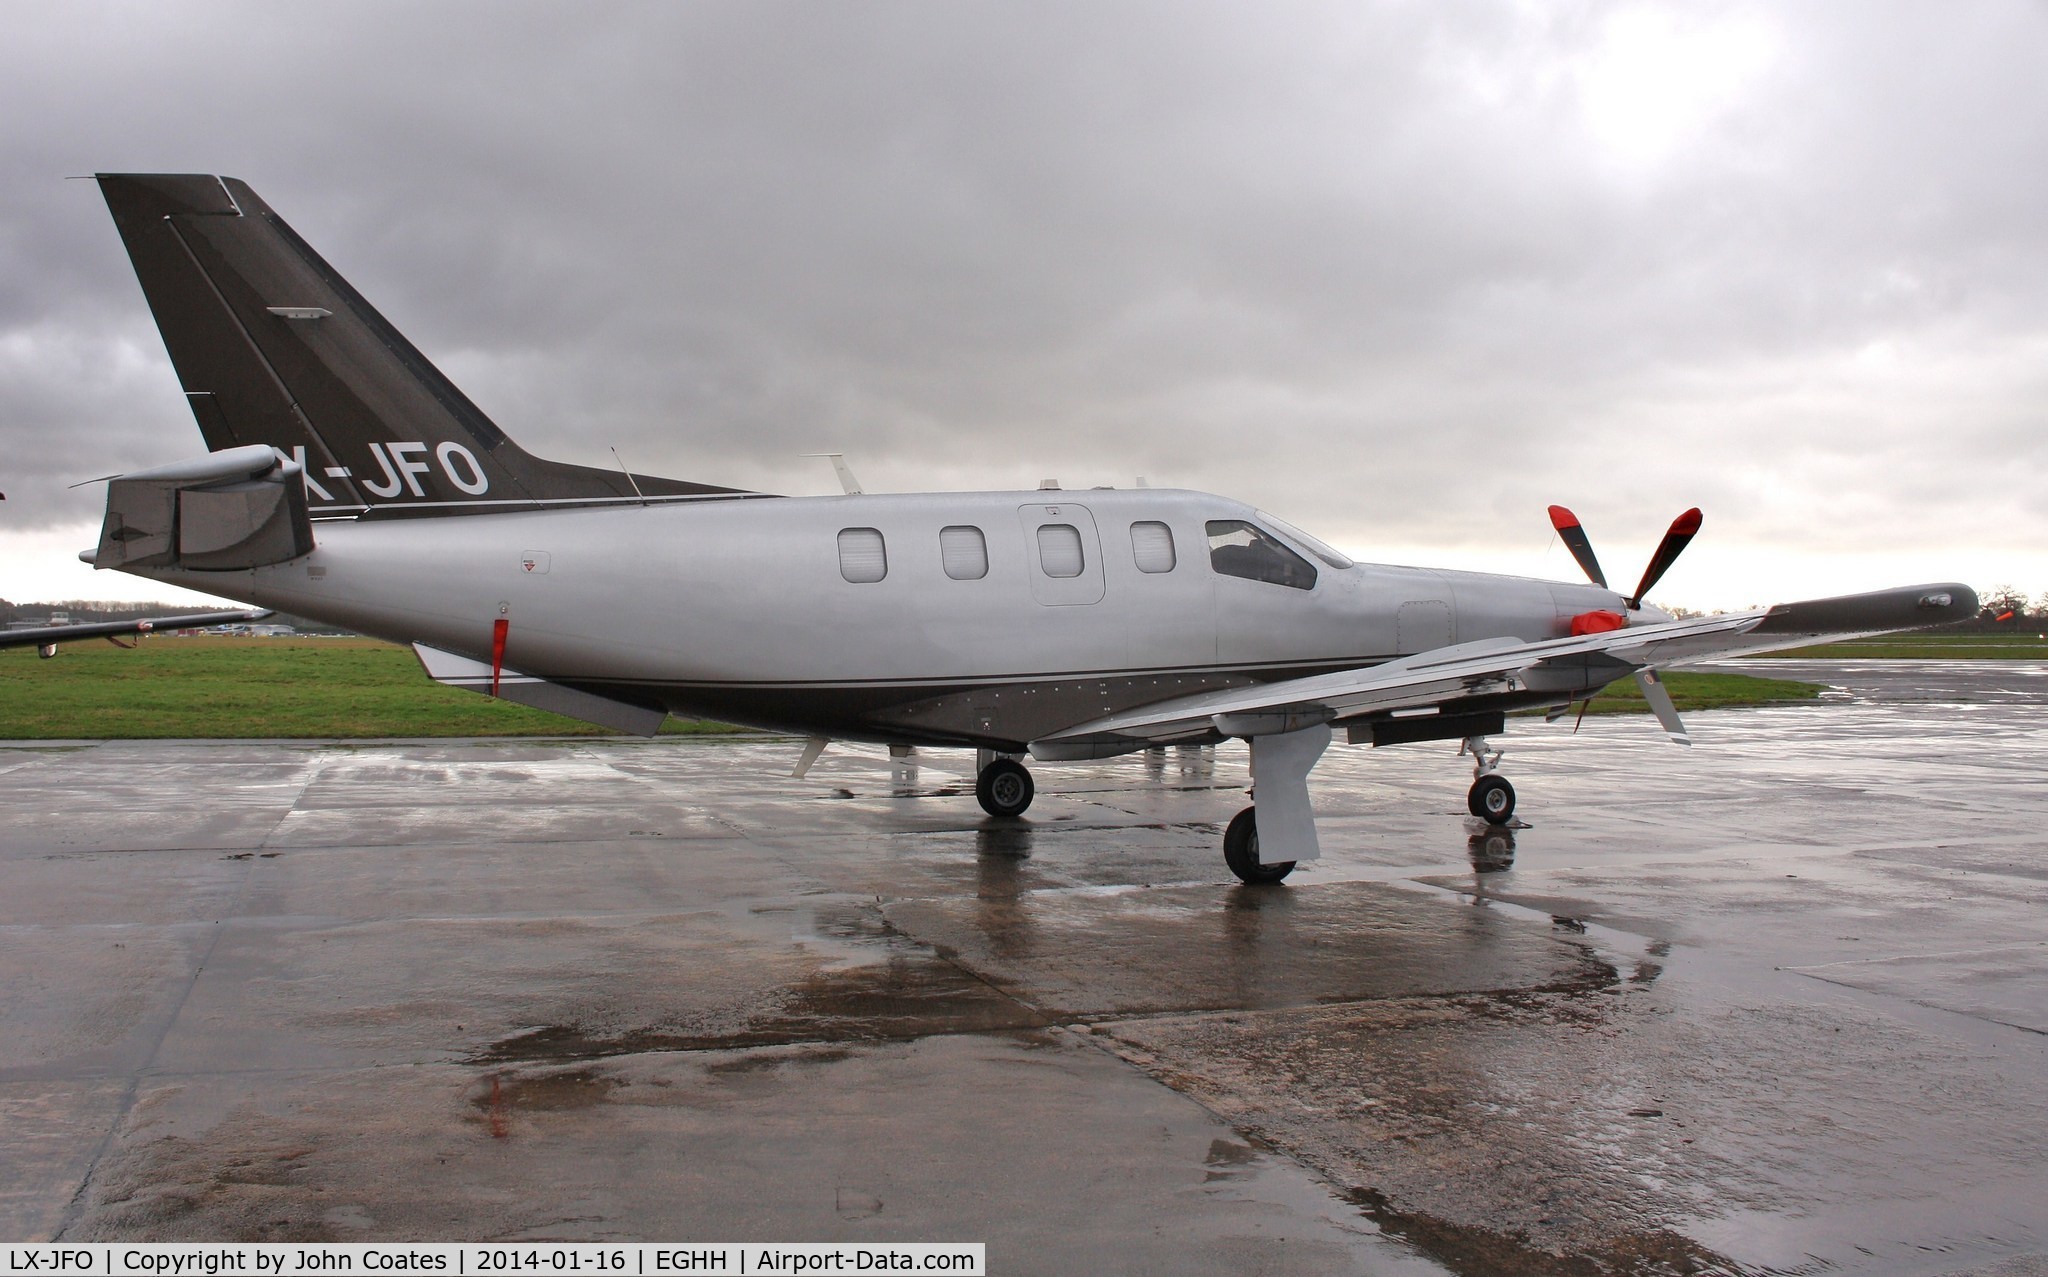 LX-JFO, 2007 Socata TBM-850 C/N 422, Soon to depart after overnight visit